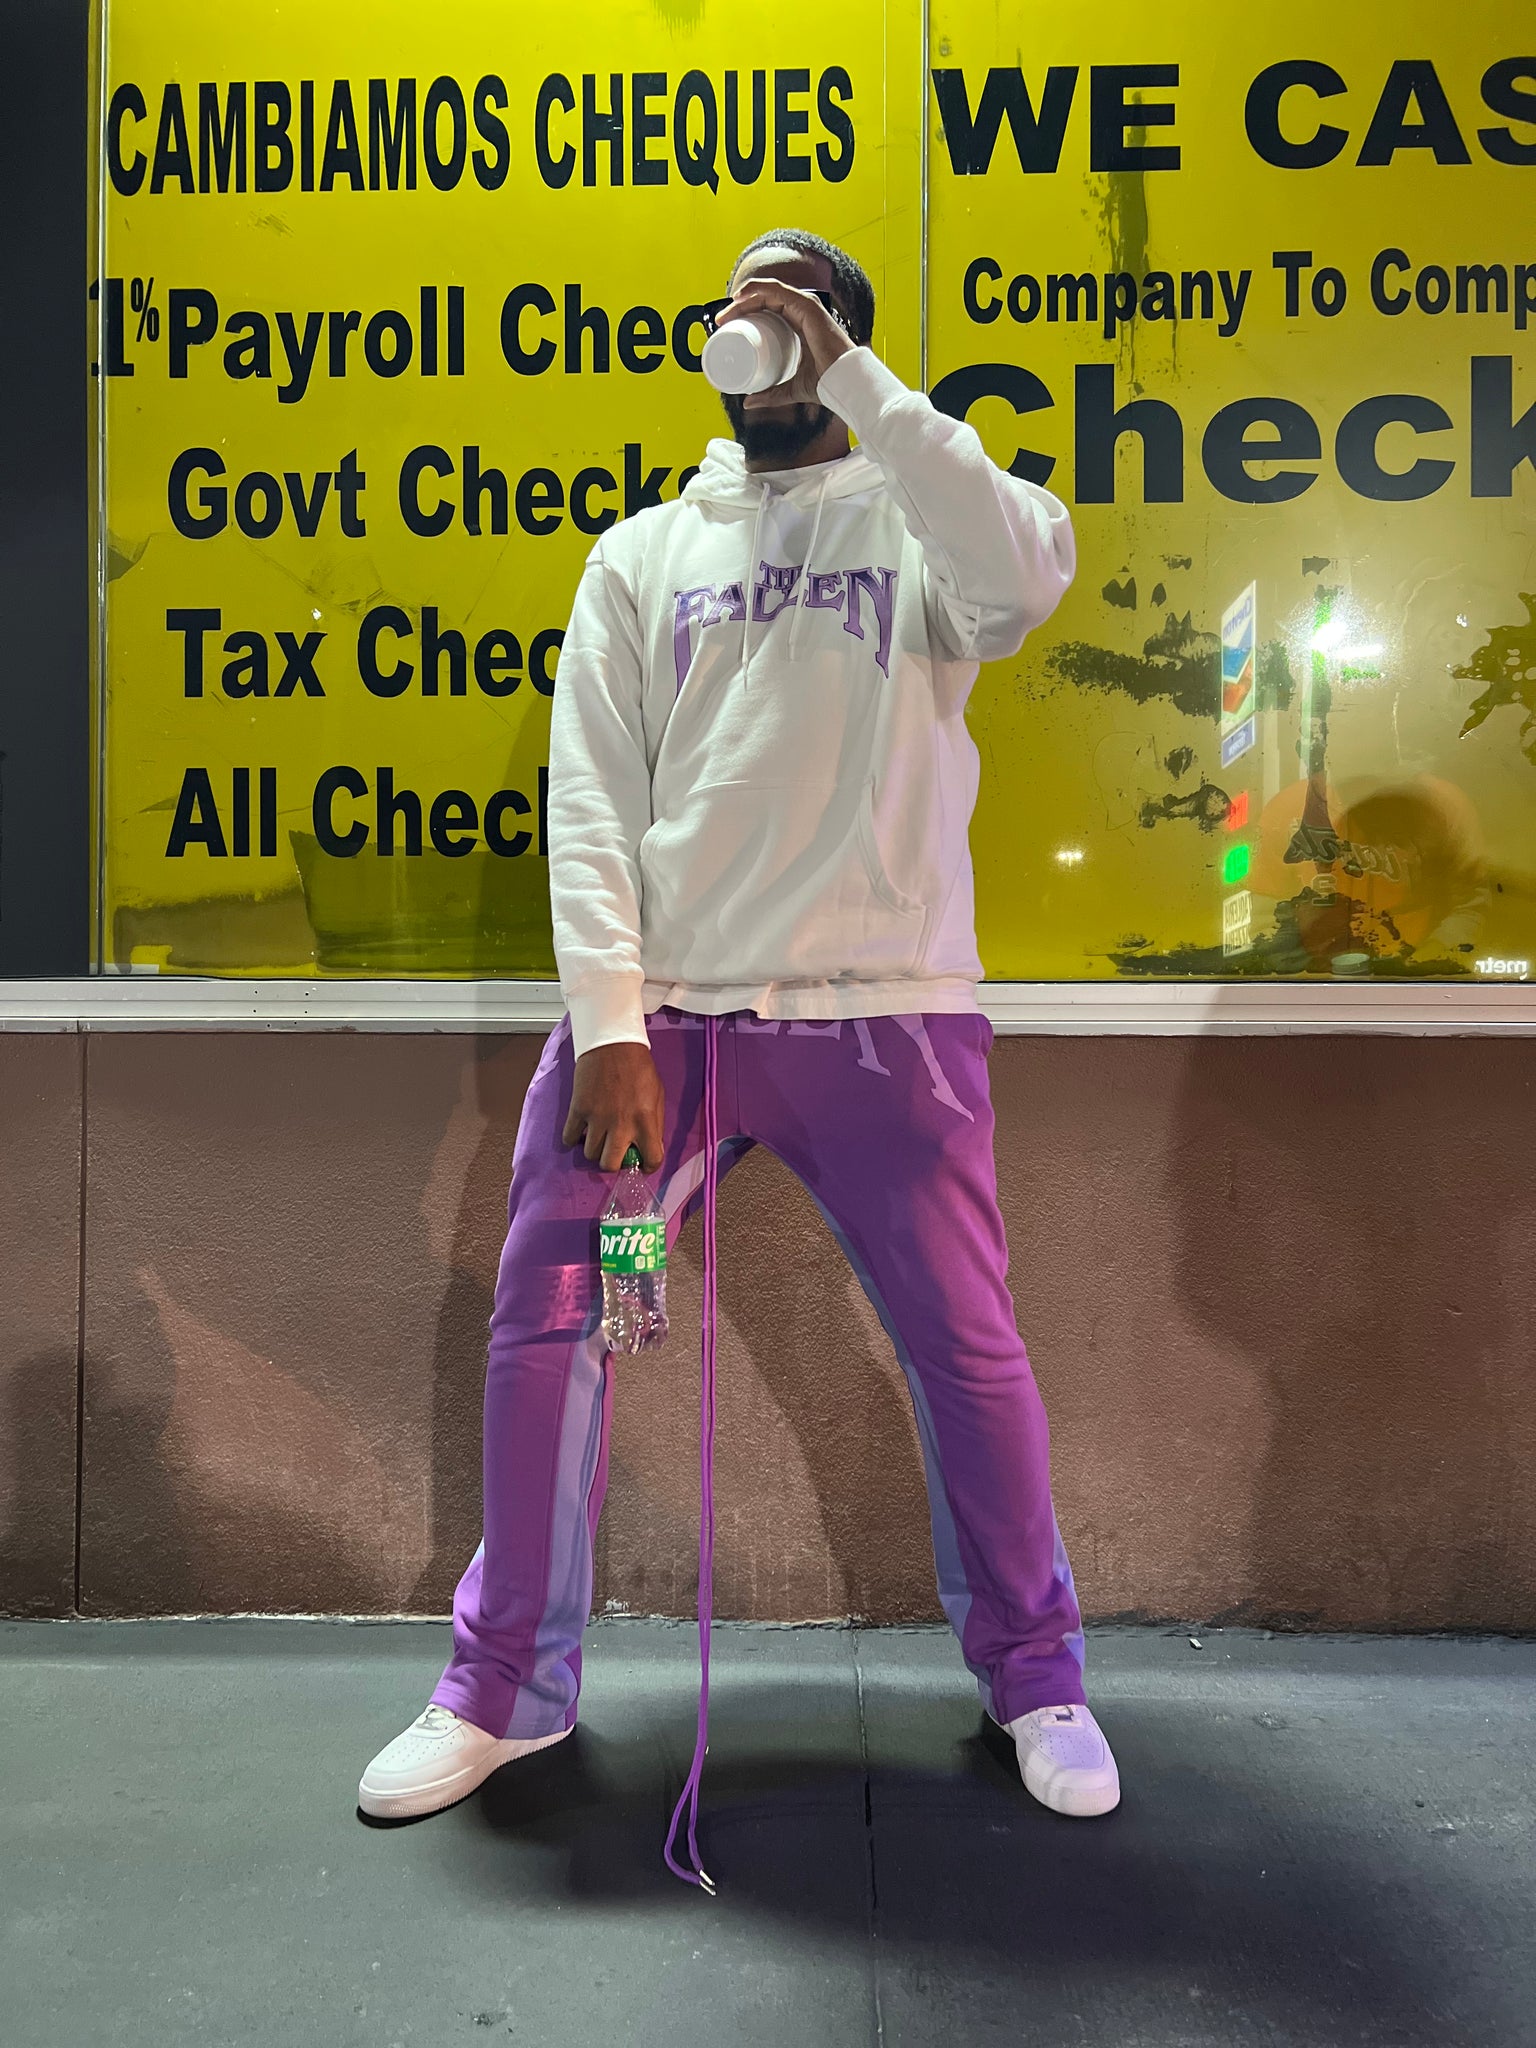 The Fallen Clothing “Dirty Sprite Collection” Stacked Sweatpants (PRE – The  Fallen Clothing Inc.